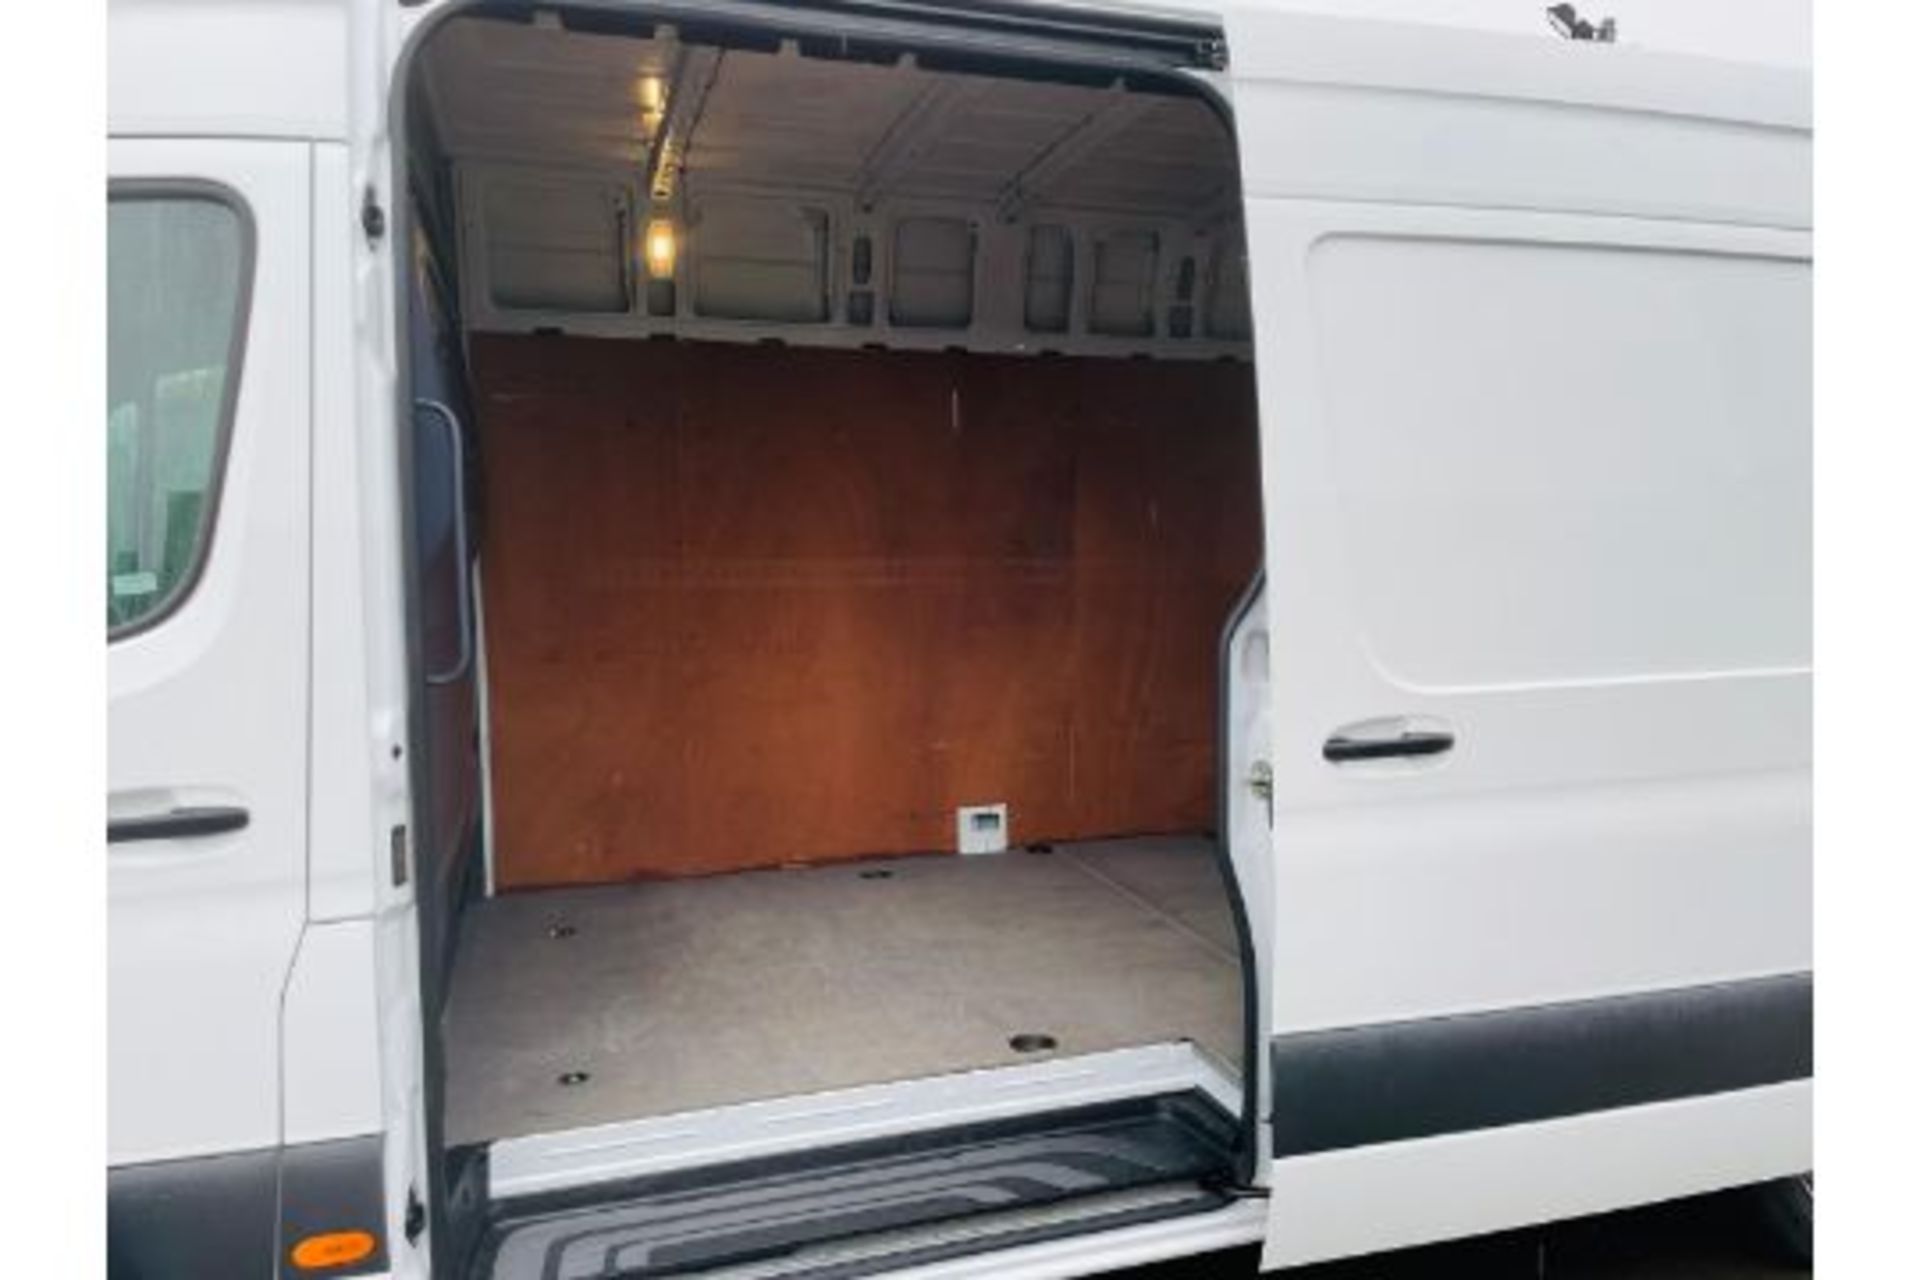 MERCEDES SPRINTER 315CDI LWB HIGH TOP 70 REG 2021 - 1 Owner From New - Euro 6 - Image 4 of 13